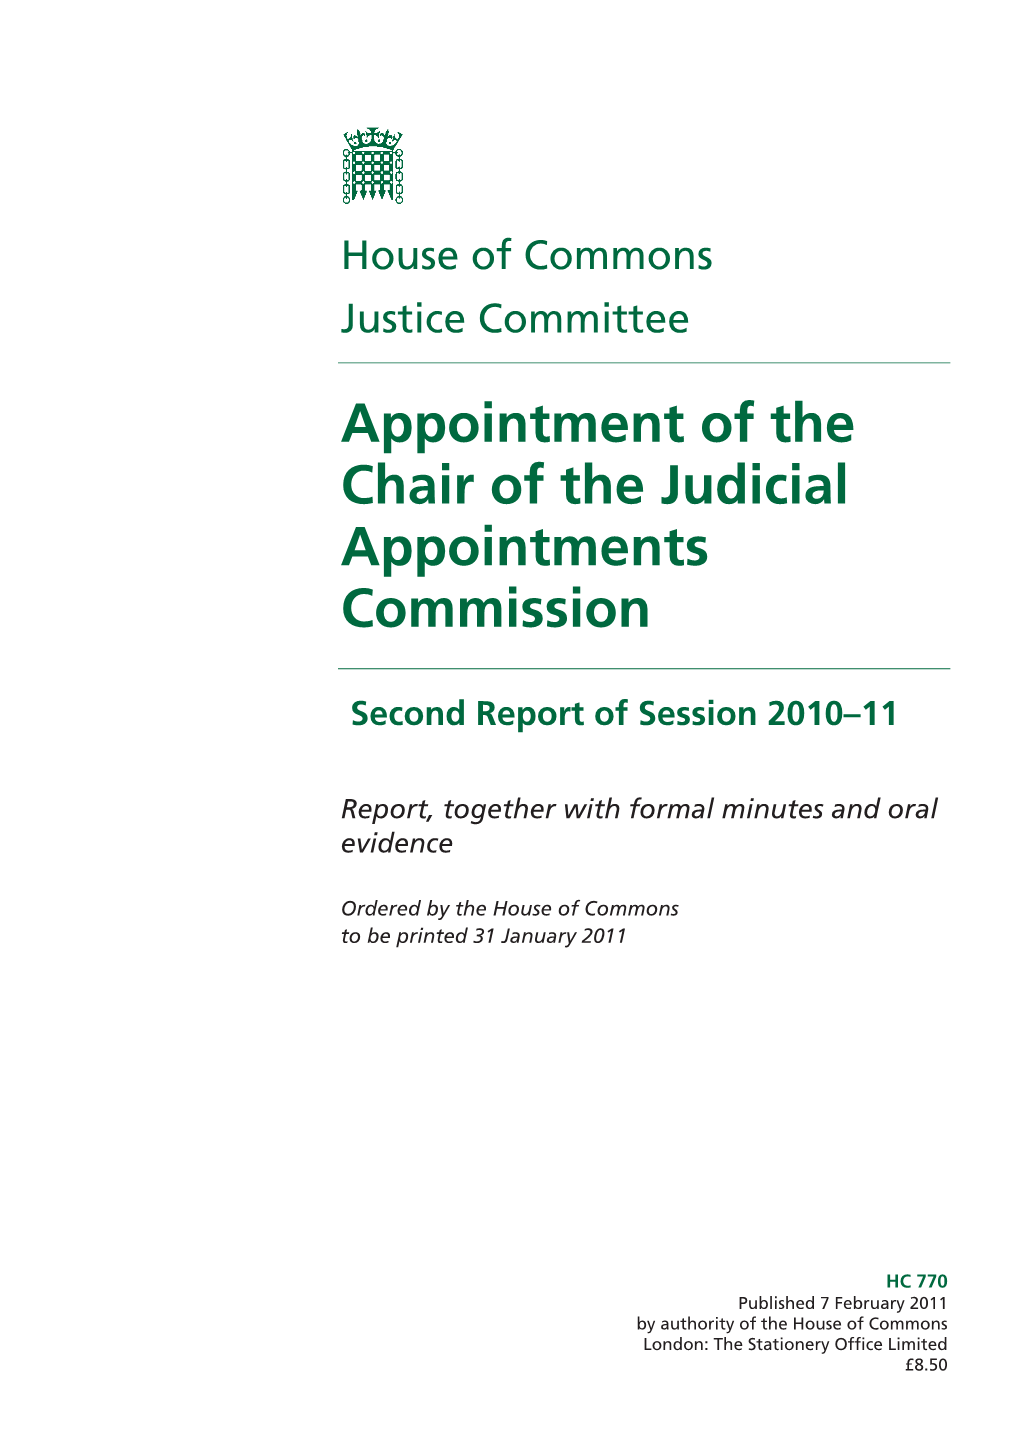 Appointment of the Chair of the Judicial Appointments Commission